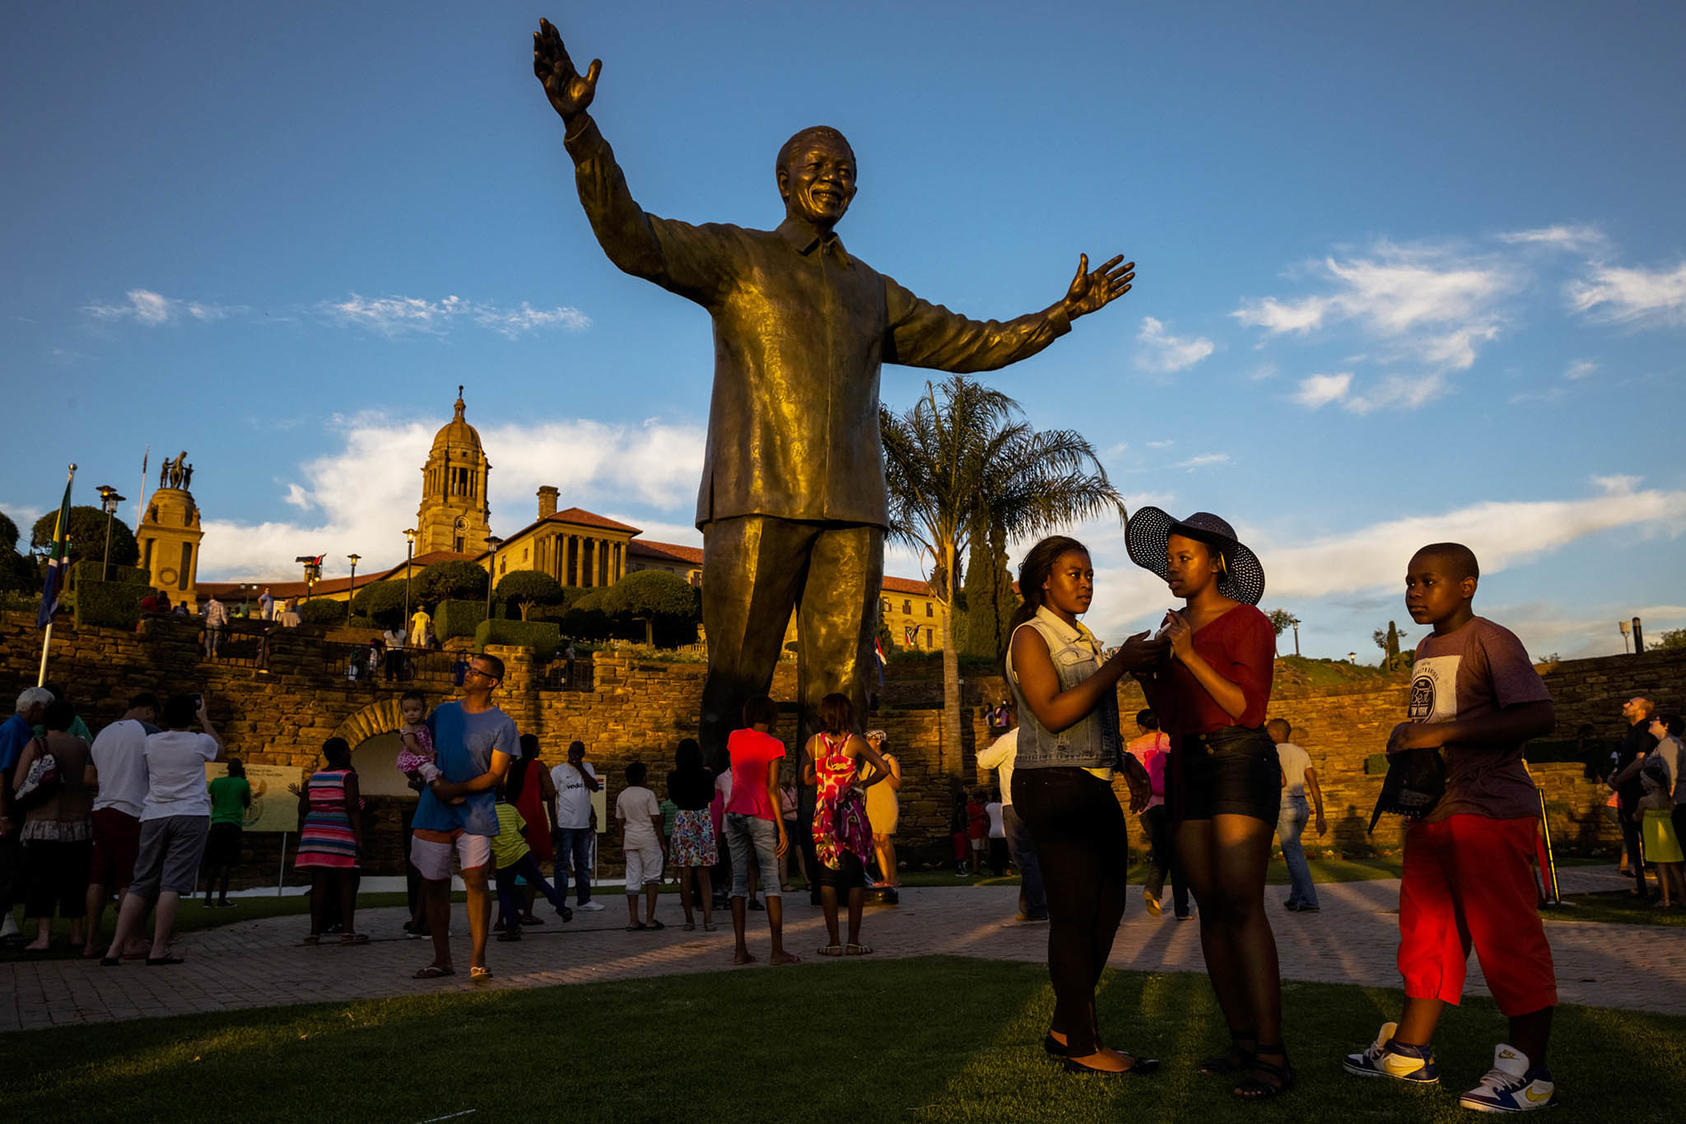 A statue of former President Nelson Mandela stands in South Africa’s executive capital, Pretoria. Mandela rejected the hatreds of the conflict into which he was born to lead his country toward peace and democracy. (Daniel Berehulak /The New York Times)